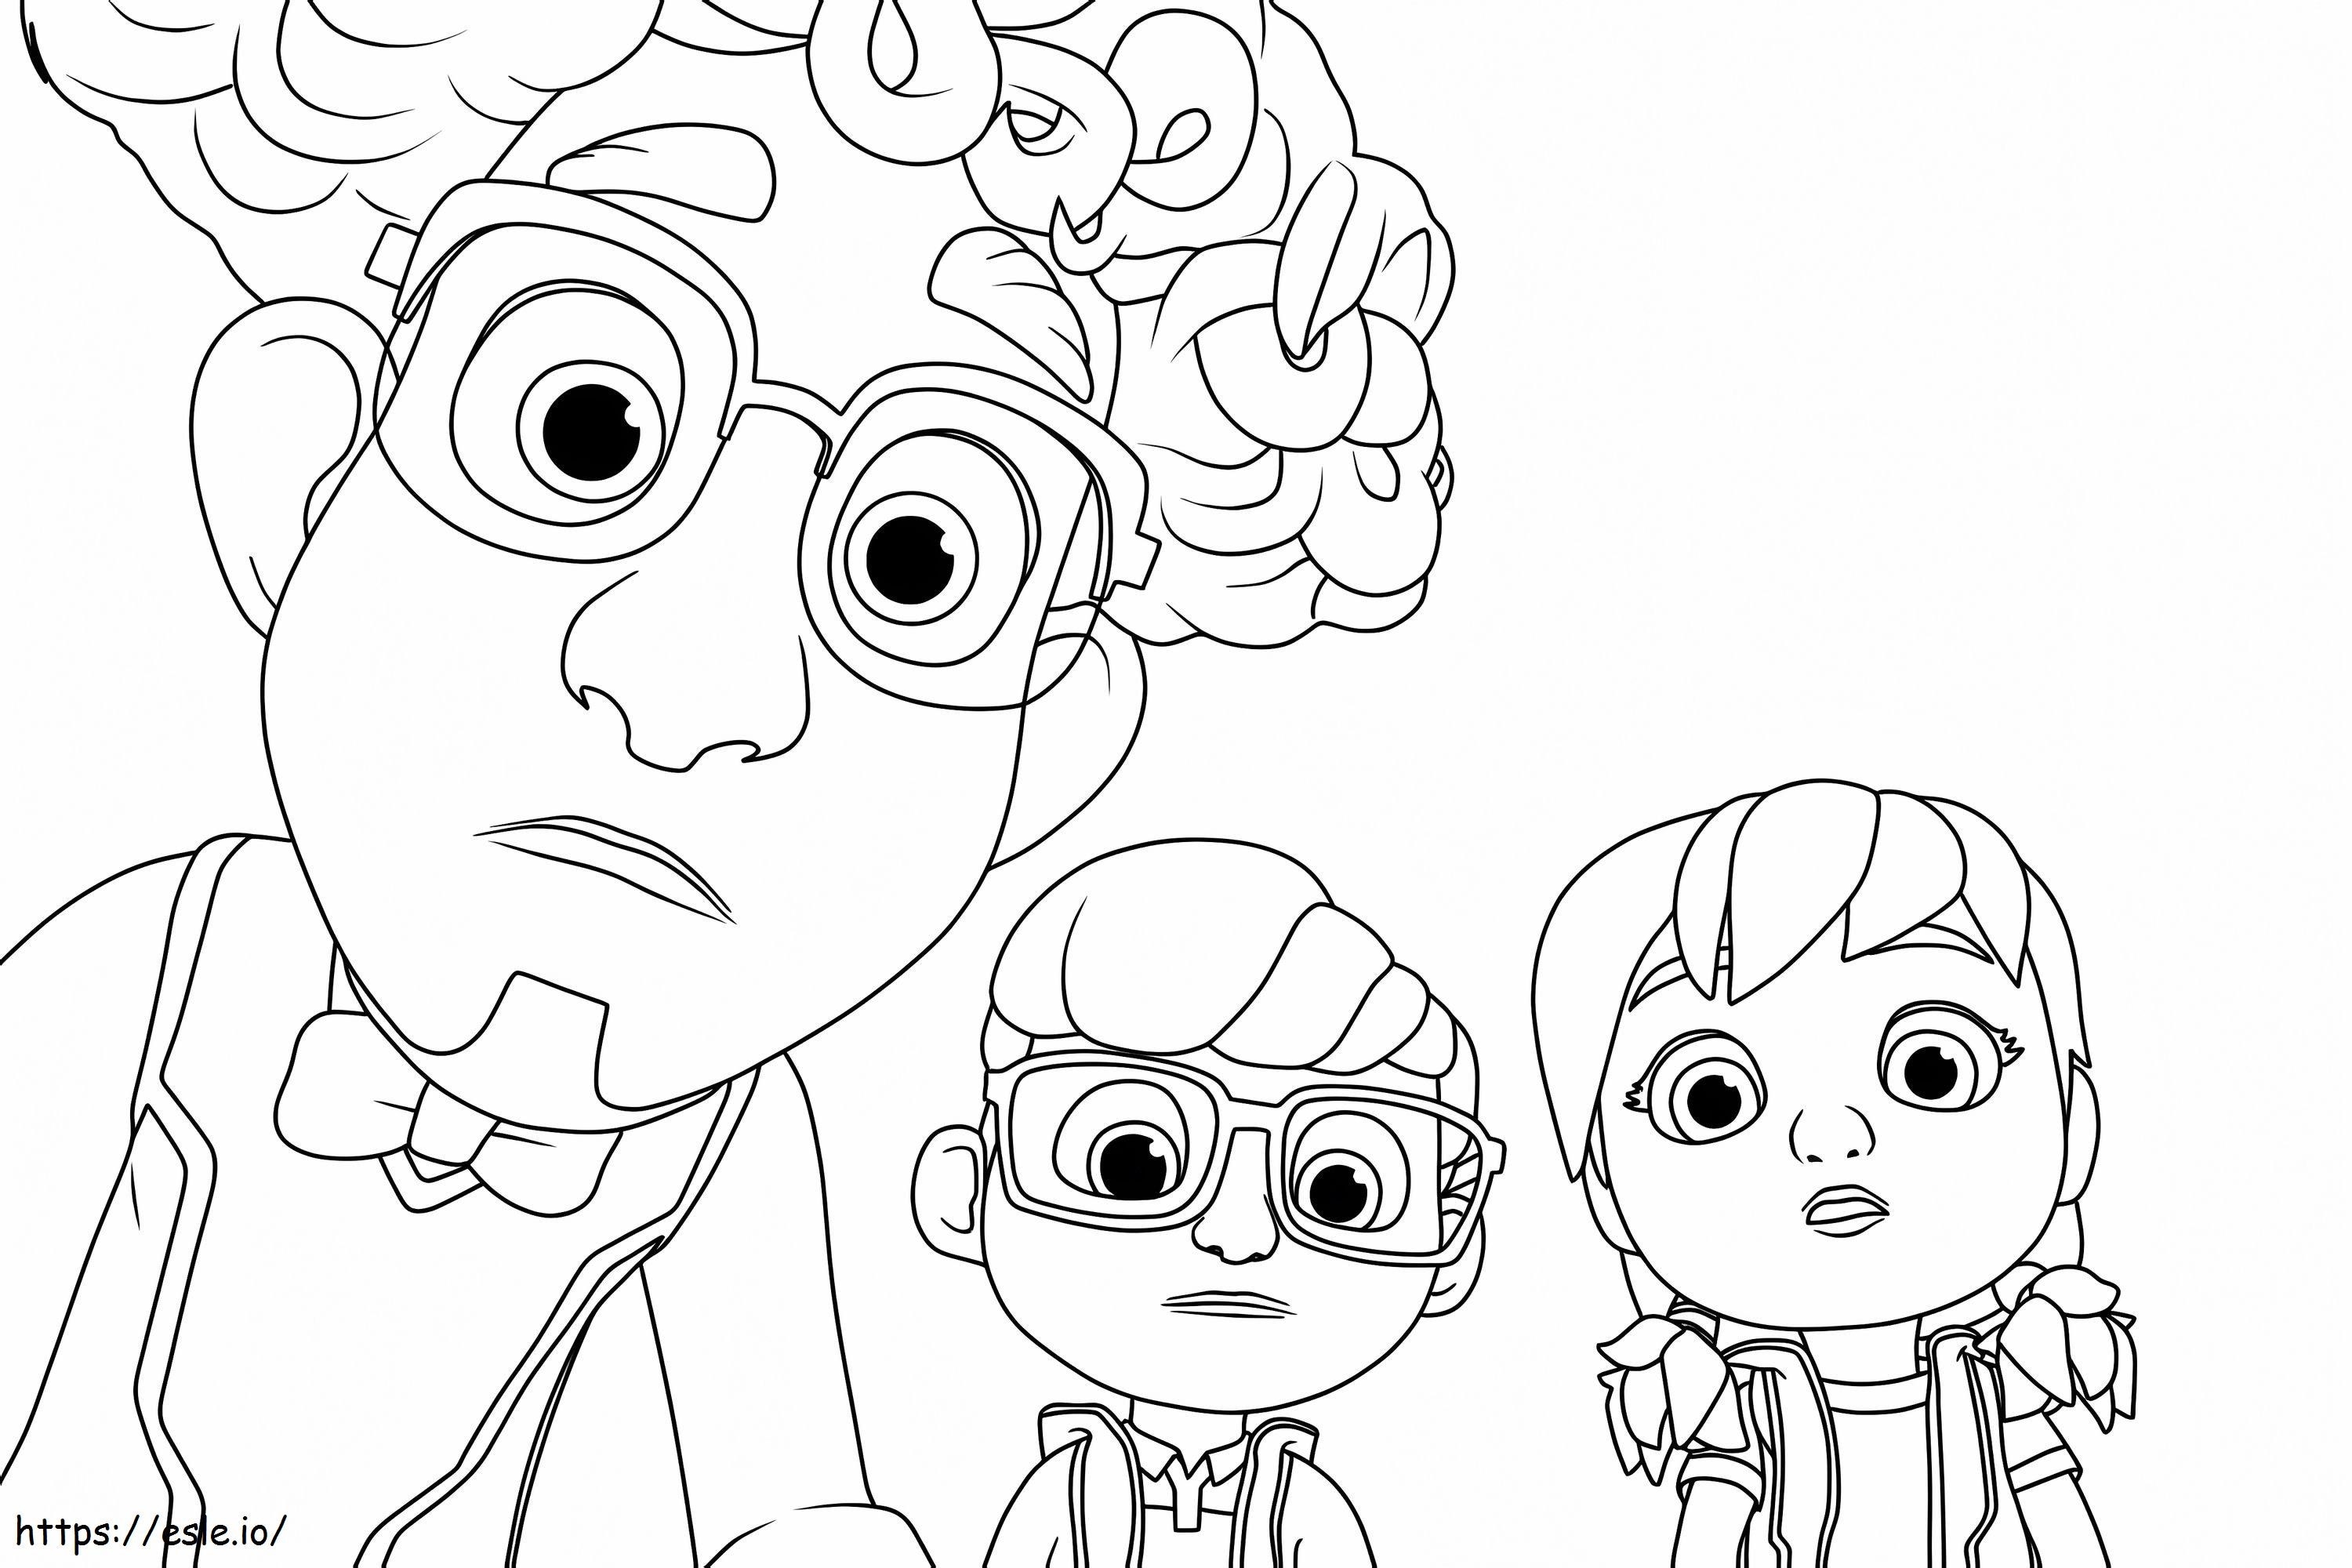 Printable Action Pack coloring page